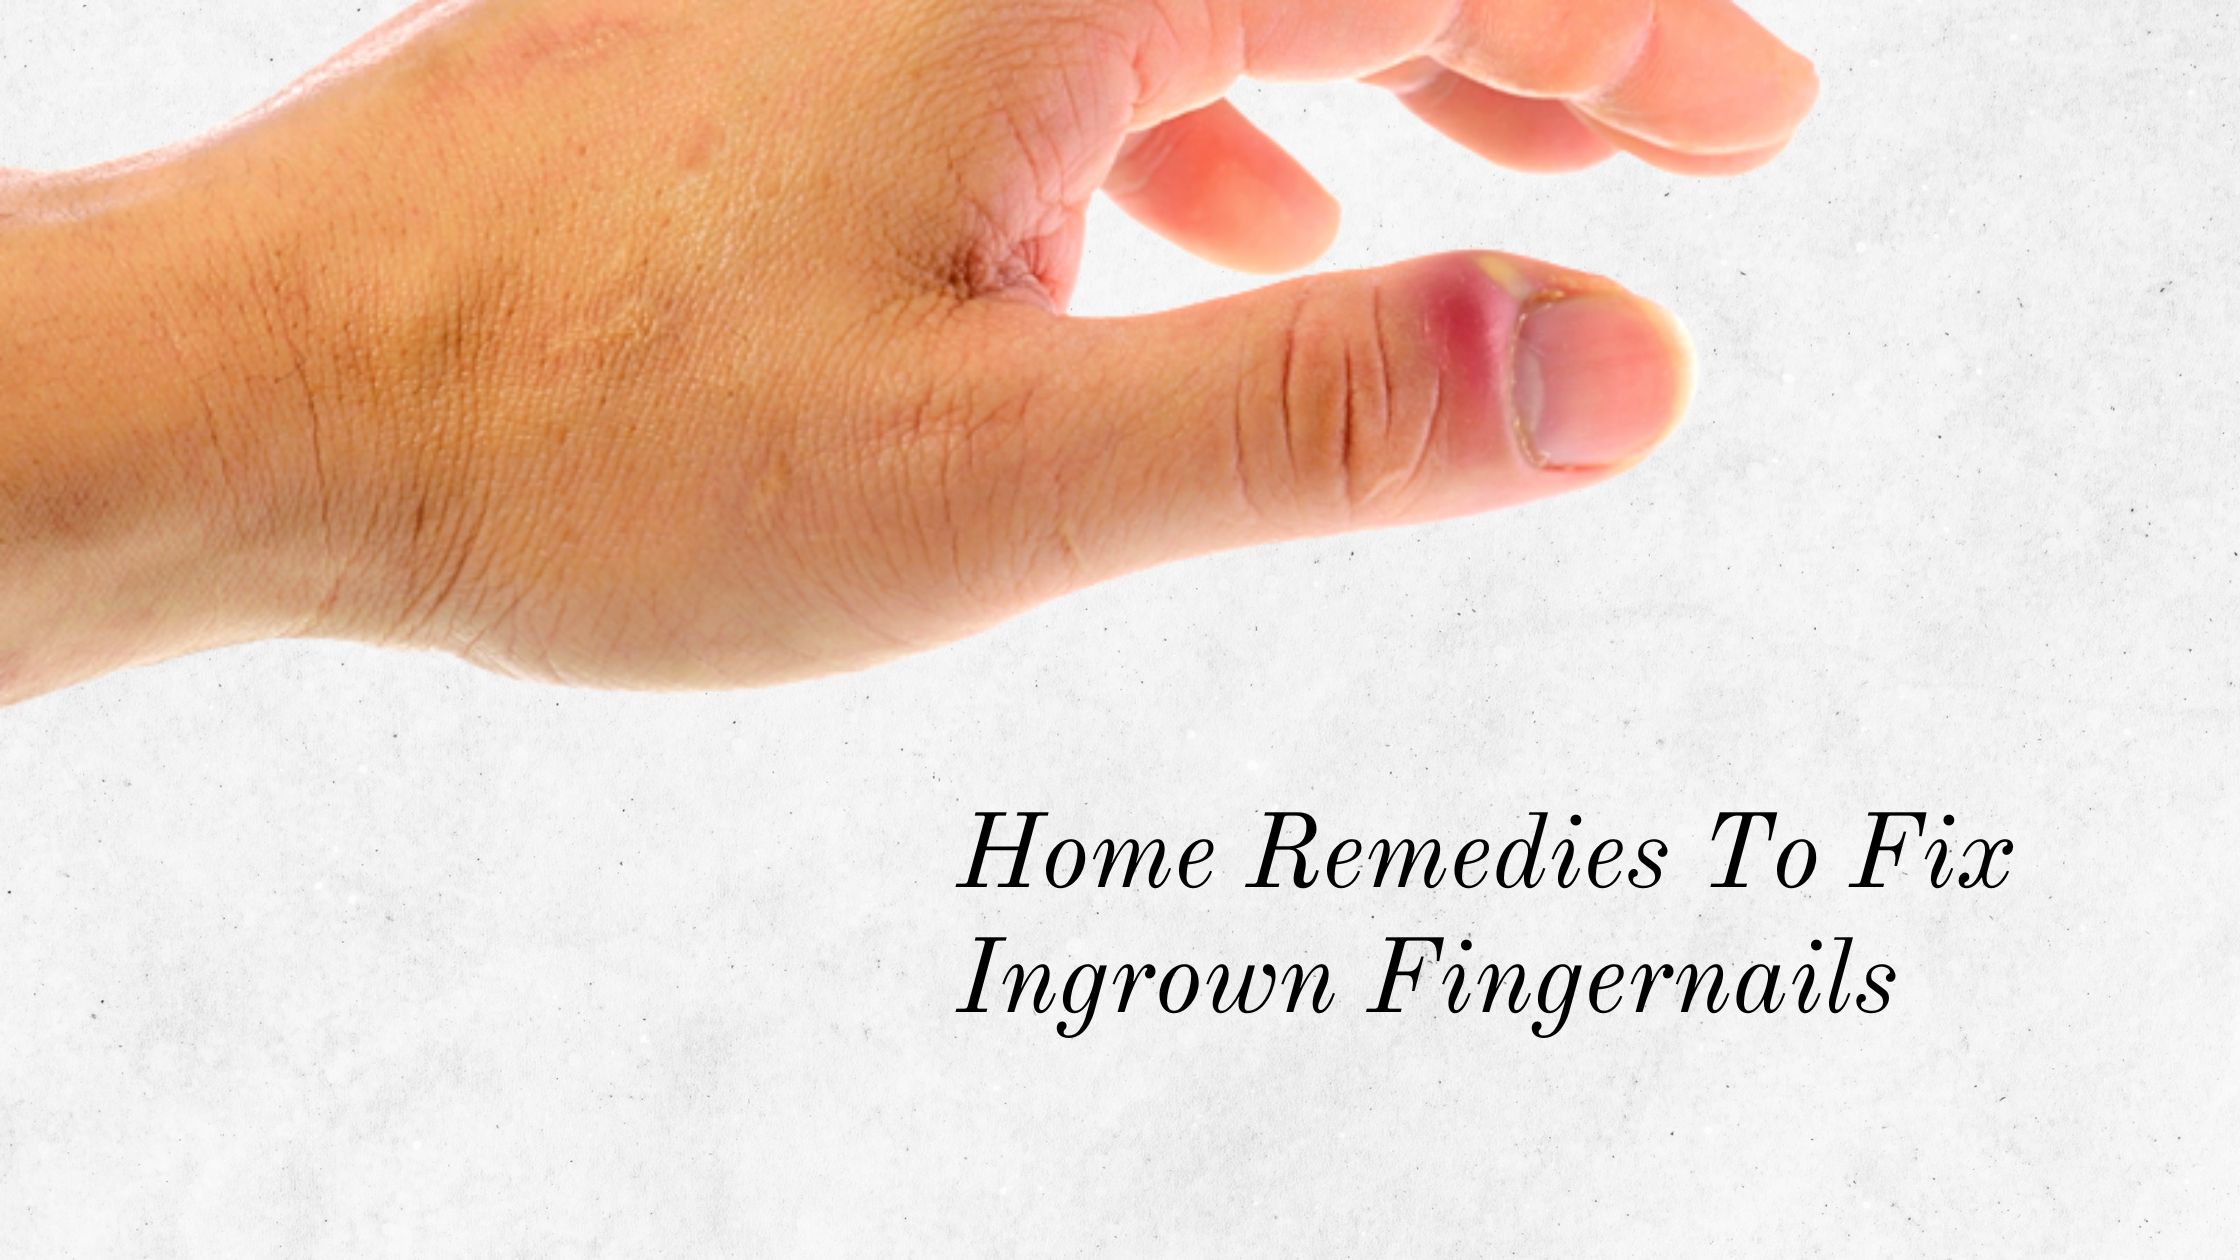 How To Treat Ingrown Fingernails At Home